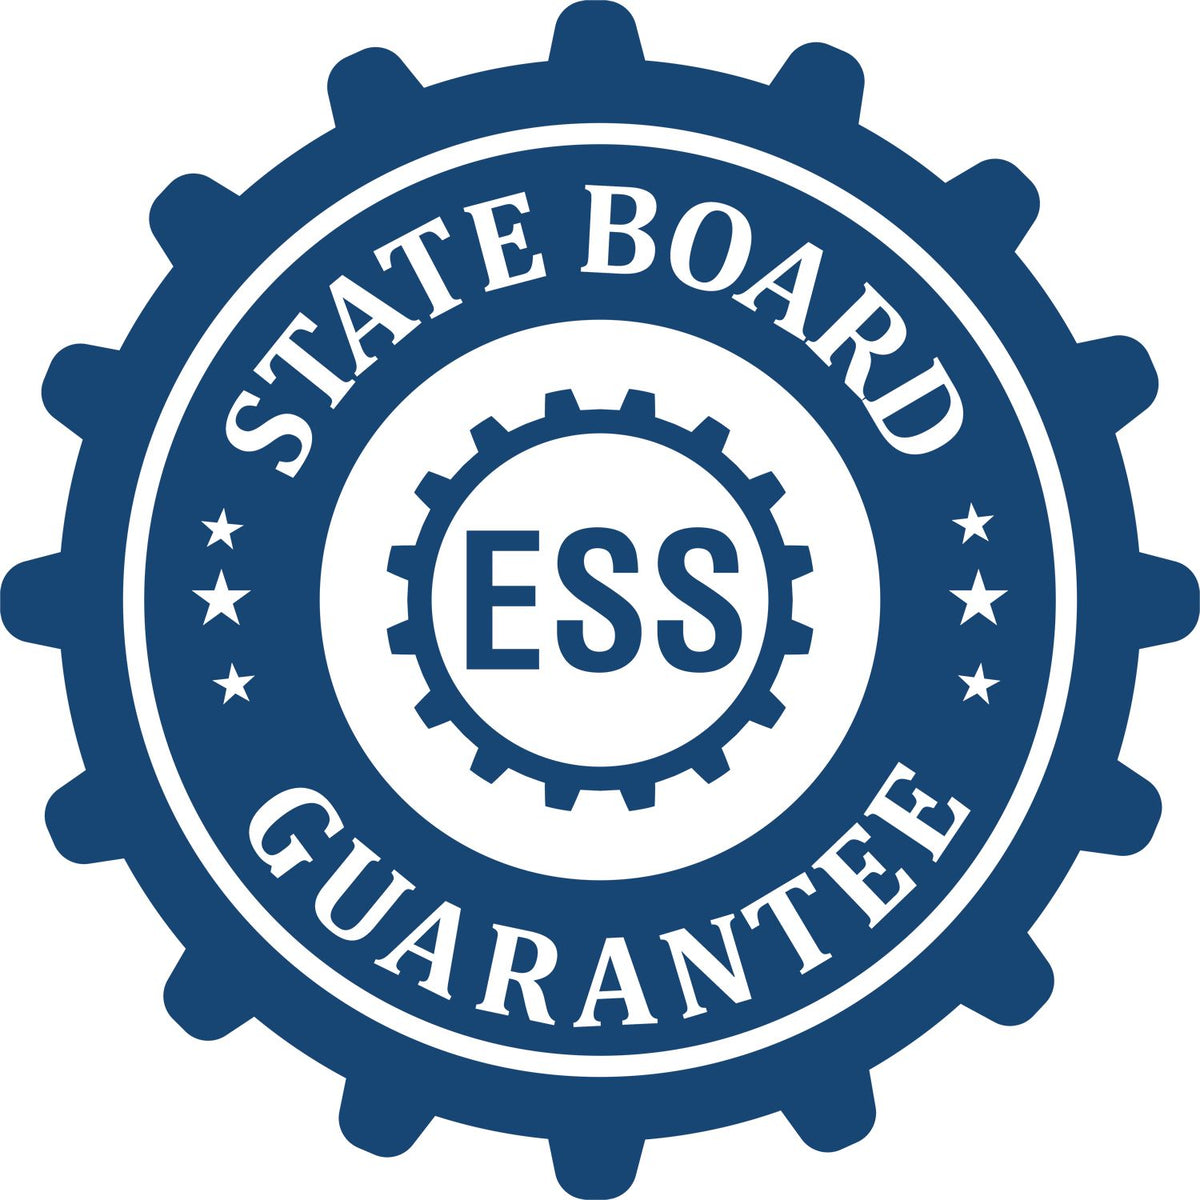 An emblem in a gear shape illustrating a state board guarantee for the State of District of Columbia Extended Long Reach Engineer Seal product.